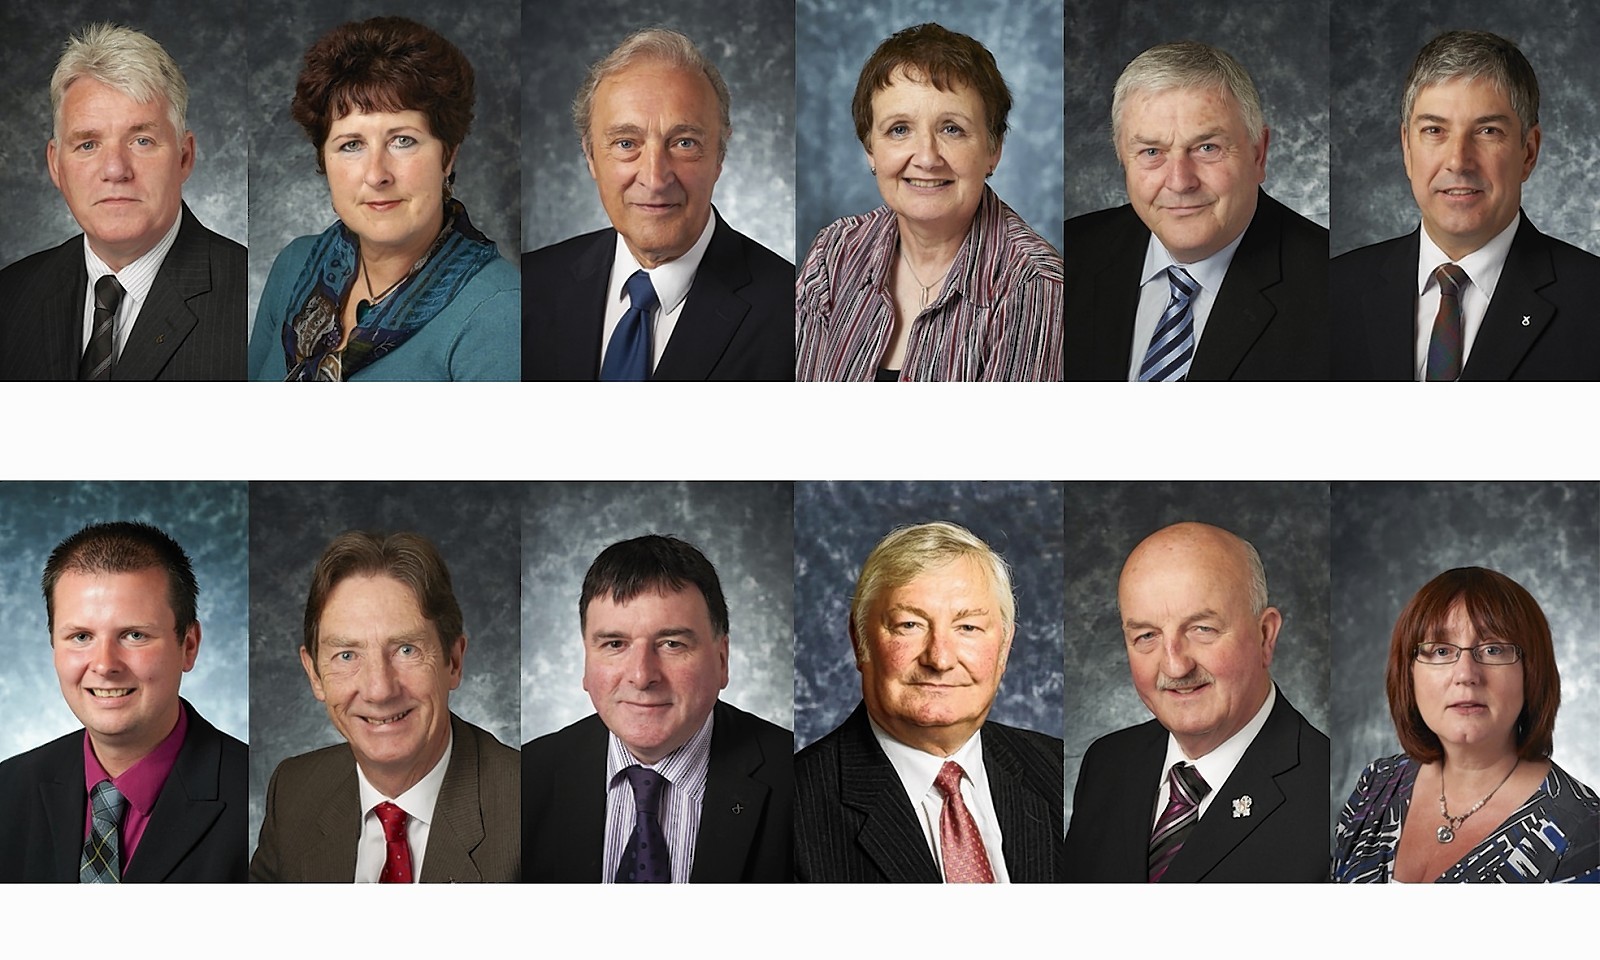 12 of the councillors who have not paid. TOP ROW: Ian Brown (SNP), Carolyn Caddick (LD), Jim Crawford (Ind), Gillian Coghill (Ind), Mike Finlayson (Ind), Craig Fraser (SNP), BOTTOM ROW: Stephen Fuller (SNP), Bren Gormley (SNP), Ken Gowans (SNP), Donnie Mackay (Ind), Willie Mackay (Ind), Angela MacLean (LD),